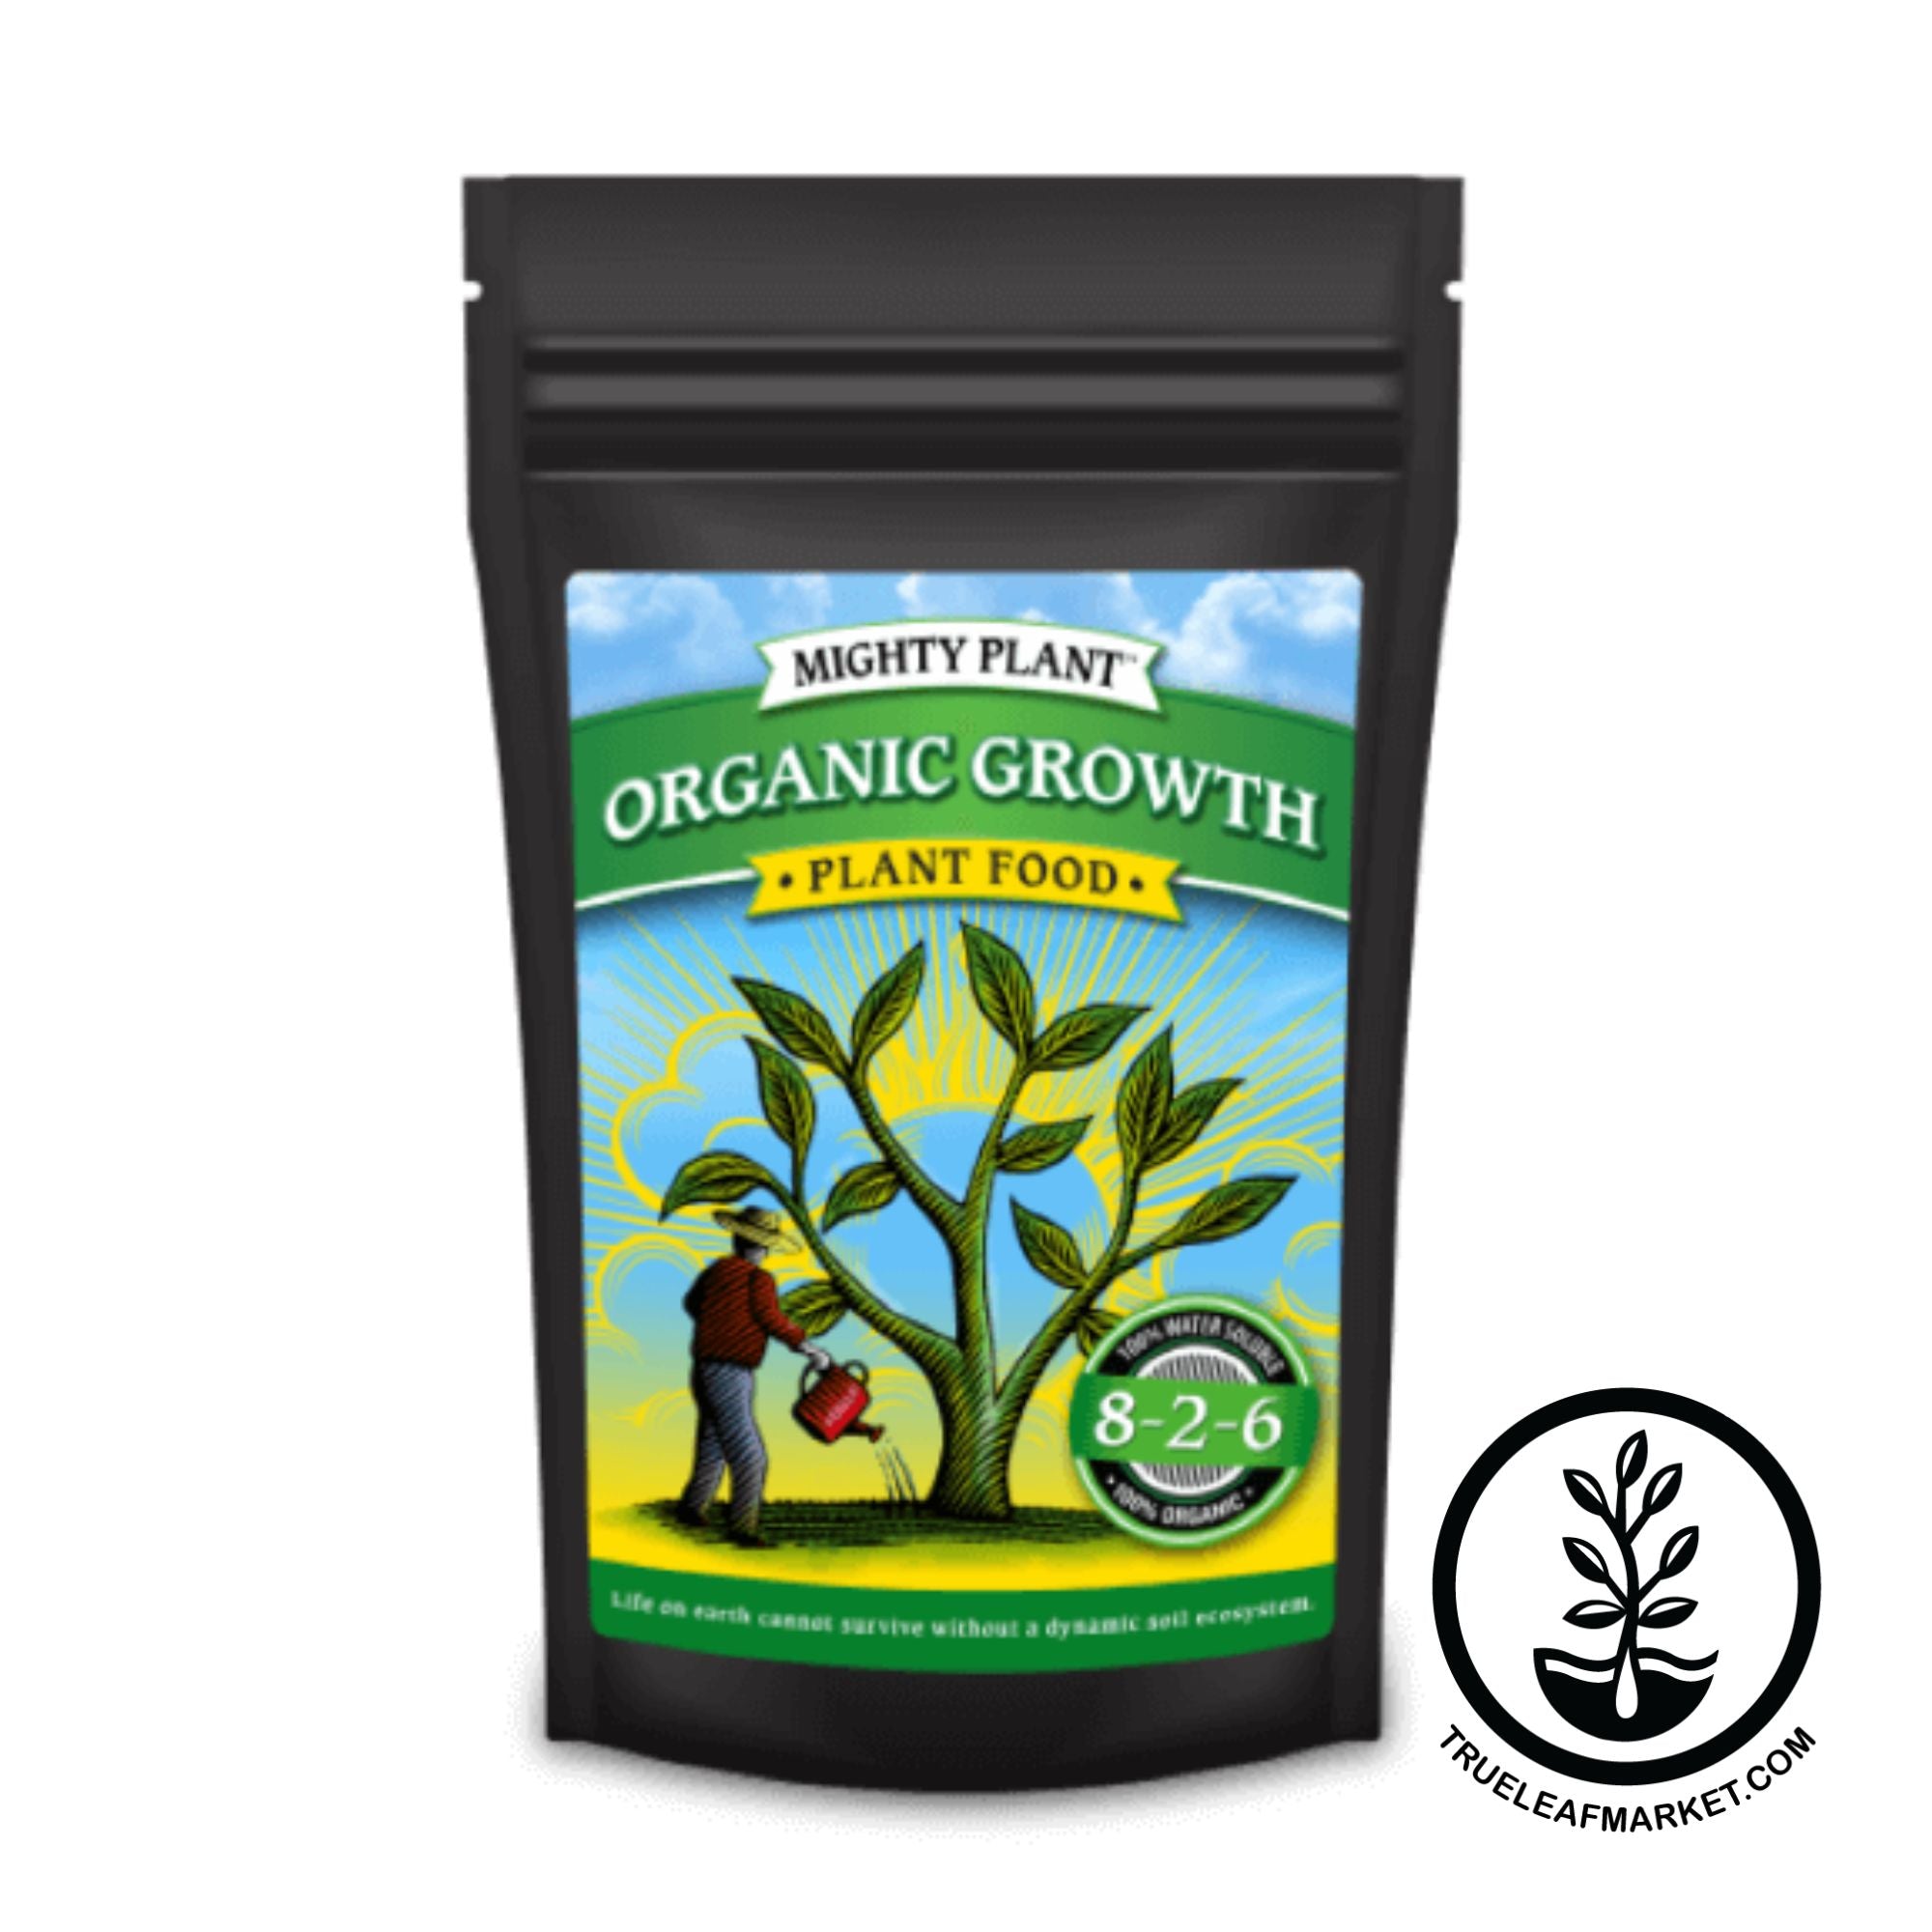 Organic growth plant food by mighty plant